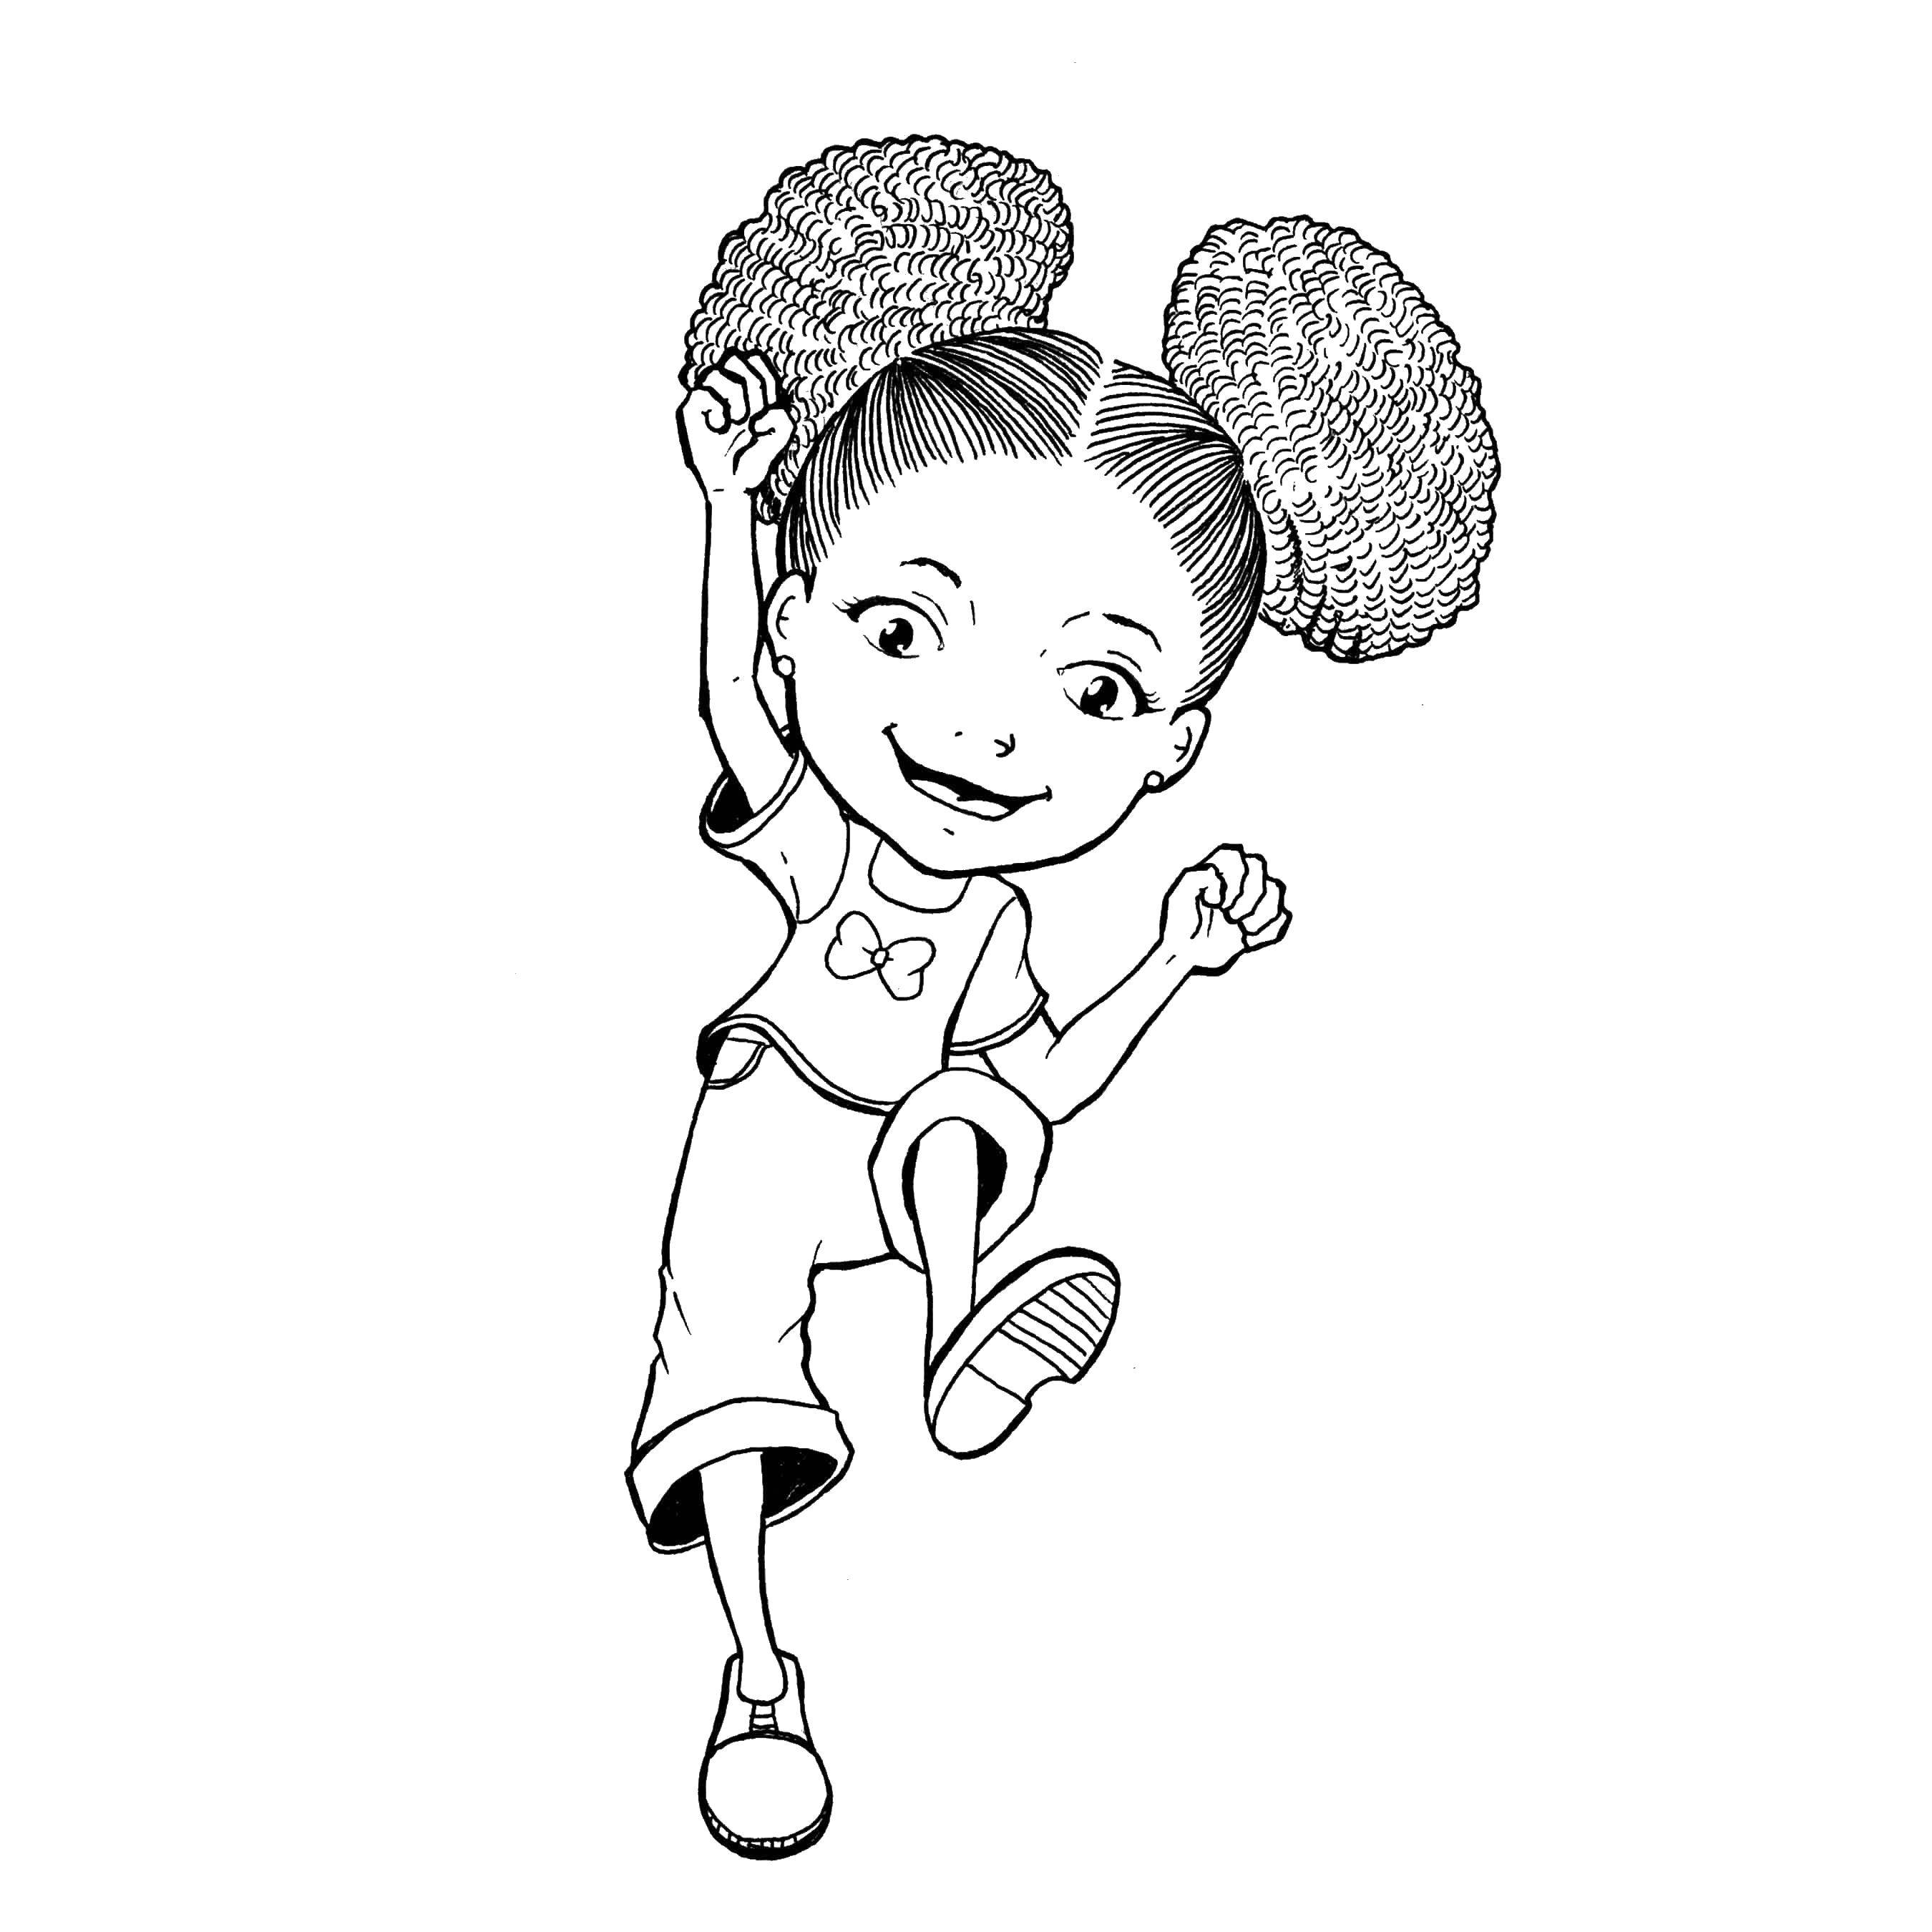 Coloring Girl with ponytails. Category children. Tags:  children, ponytails, girl.